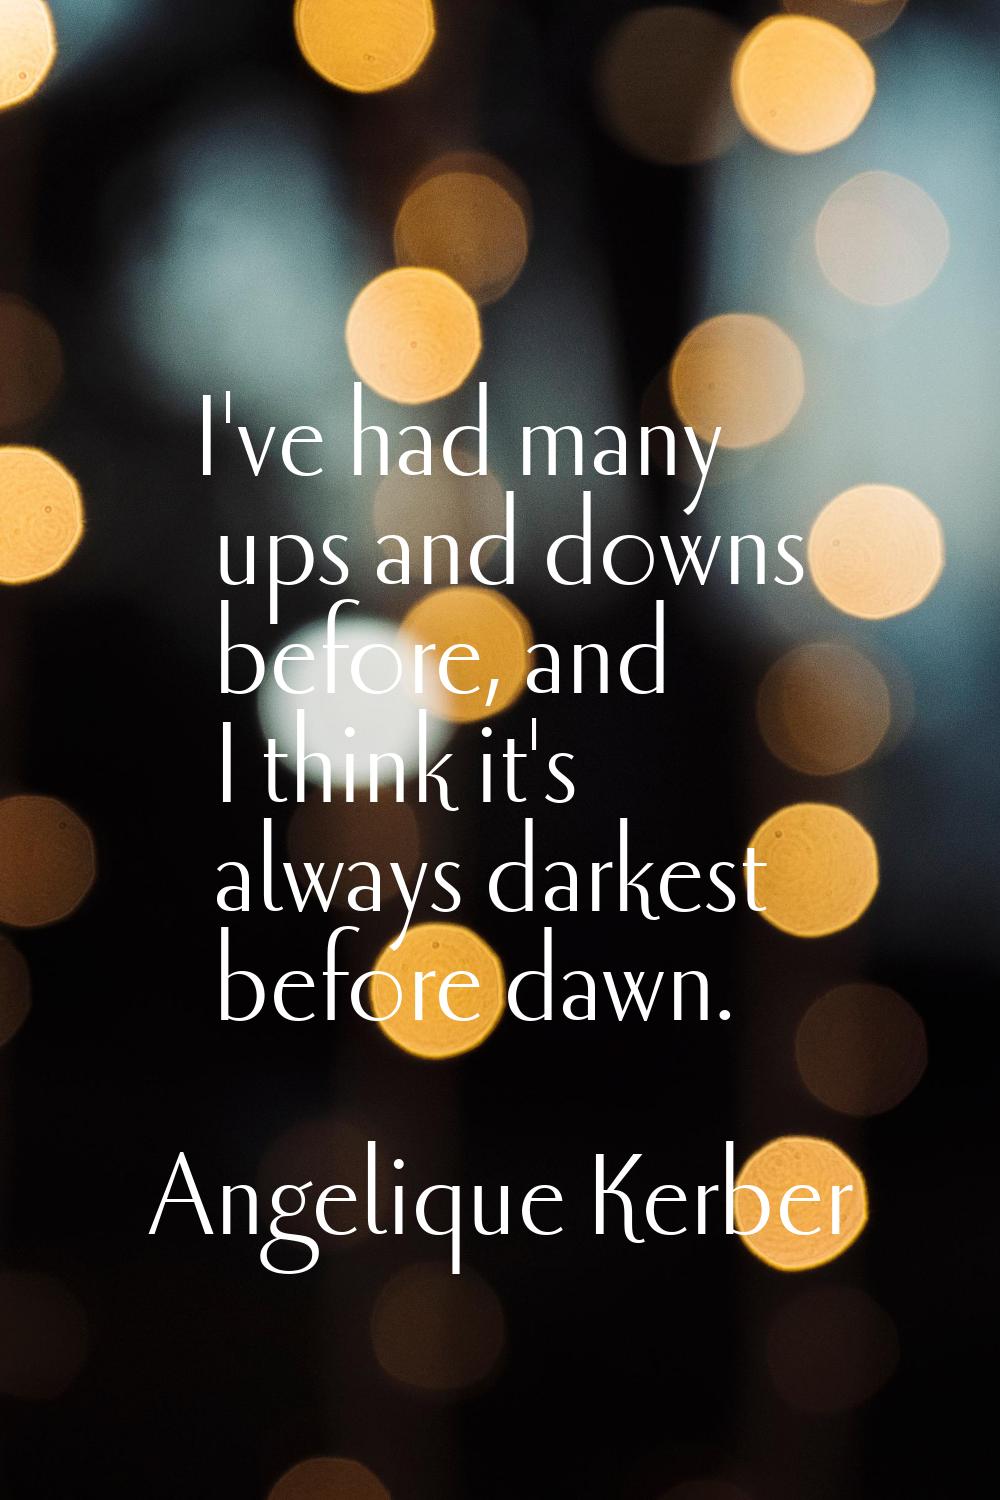 I've had many ups and downs before, and I think it's always darkest before dawn.